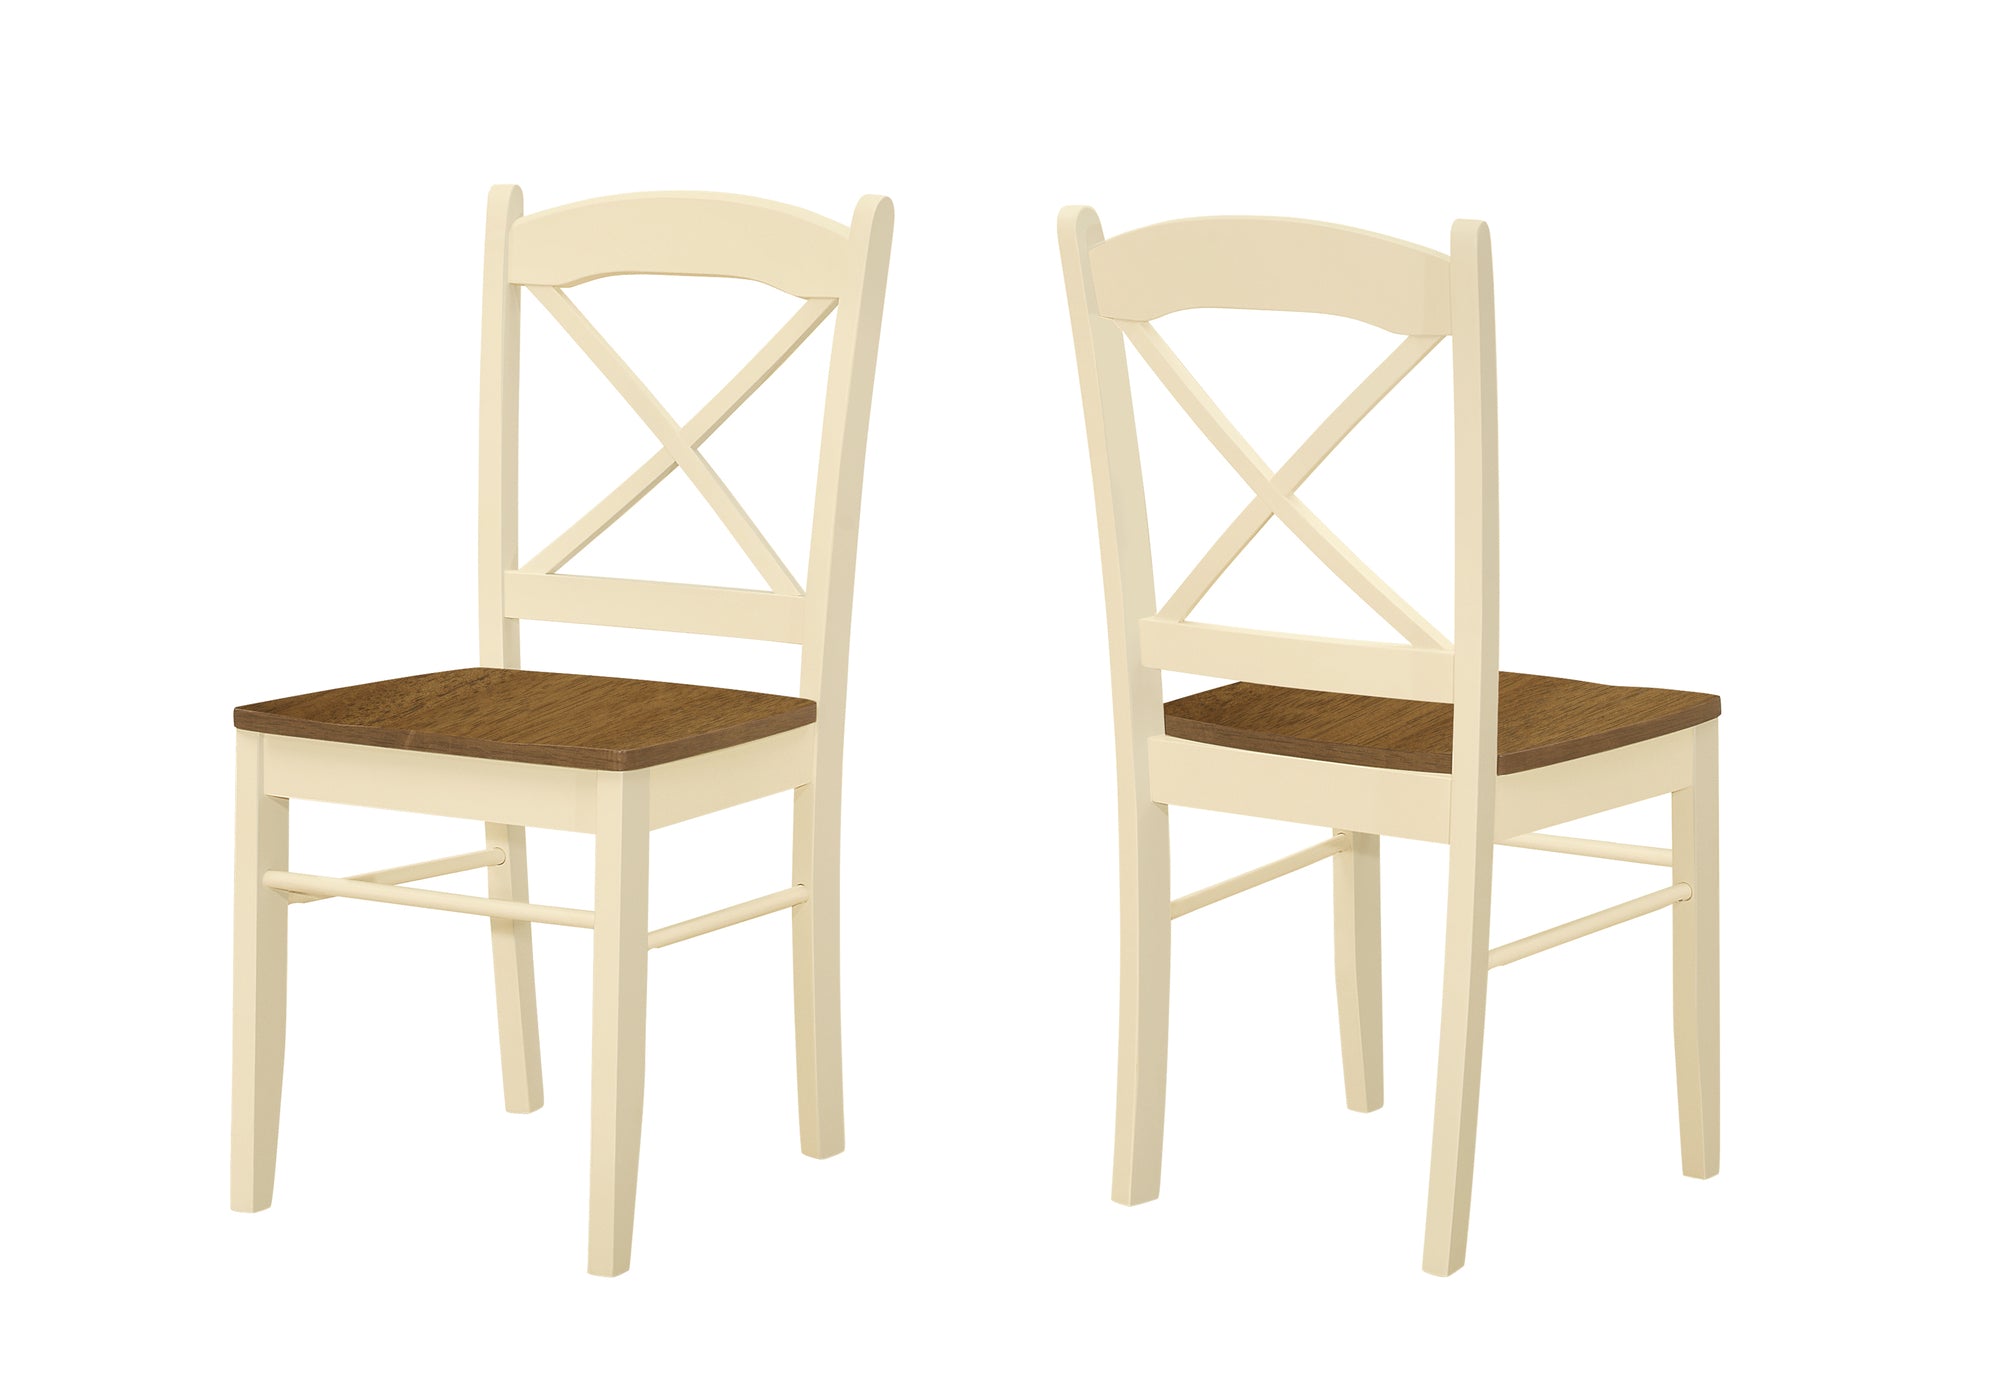 DINING CHAIR - 2PCS / 36"H WHITE